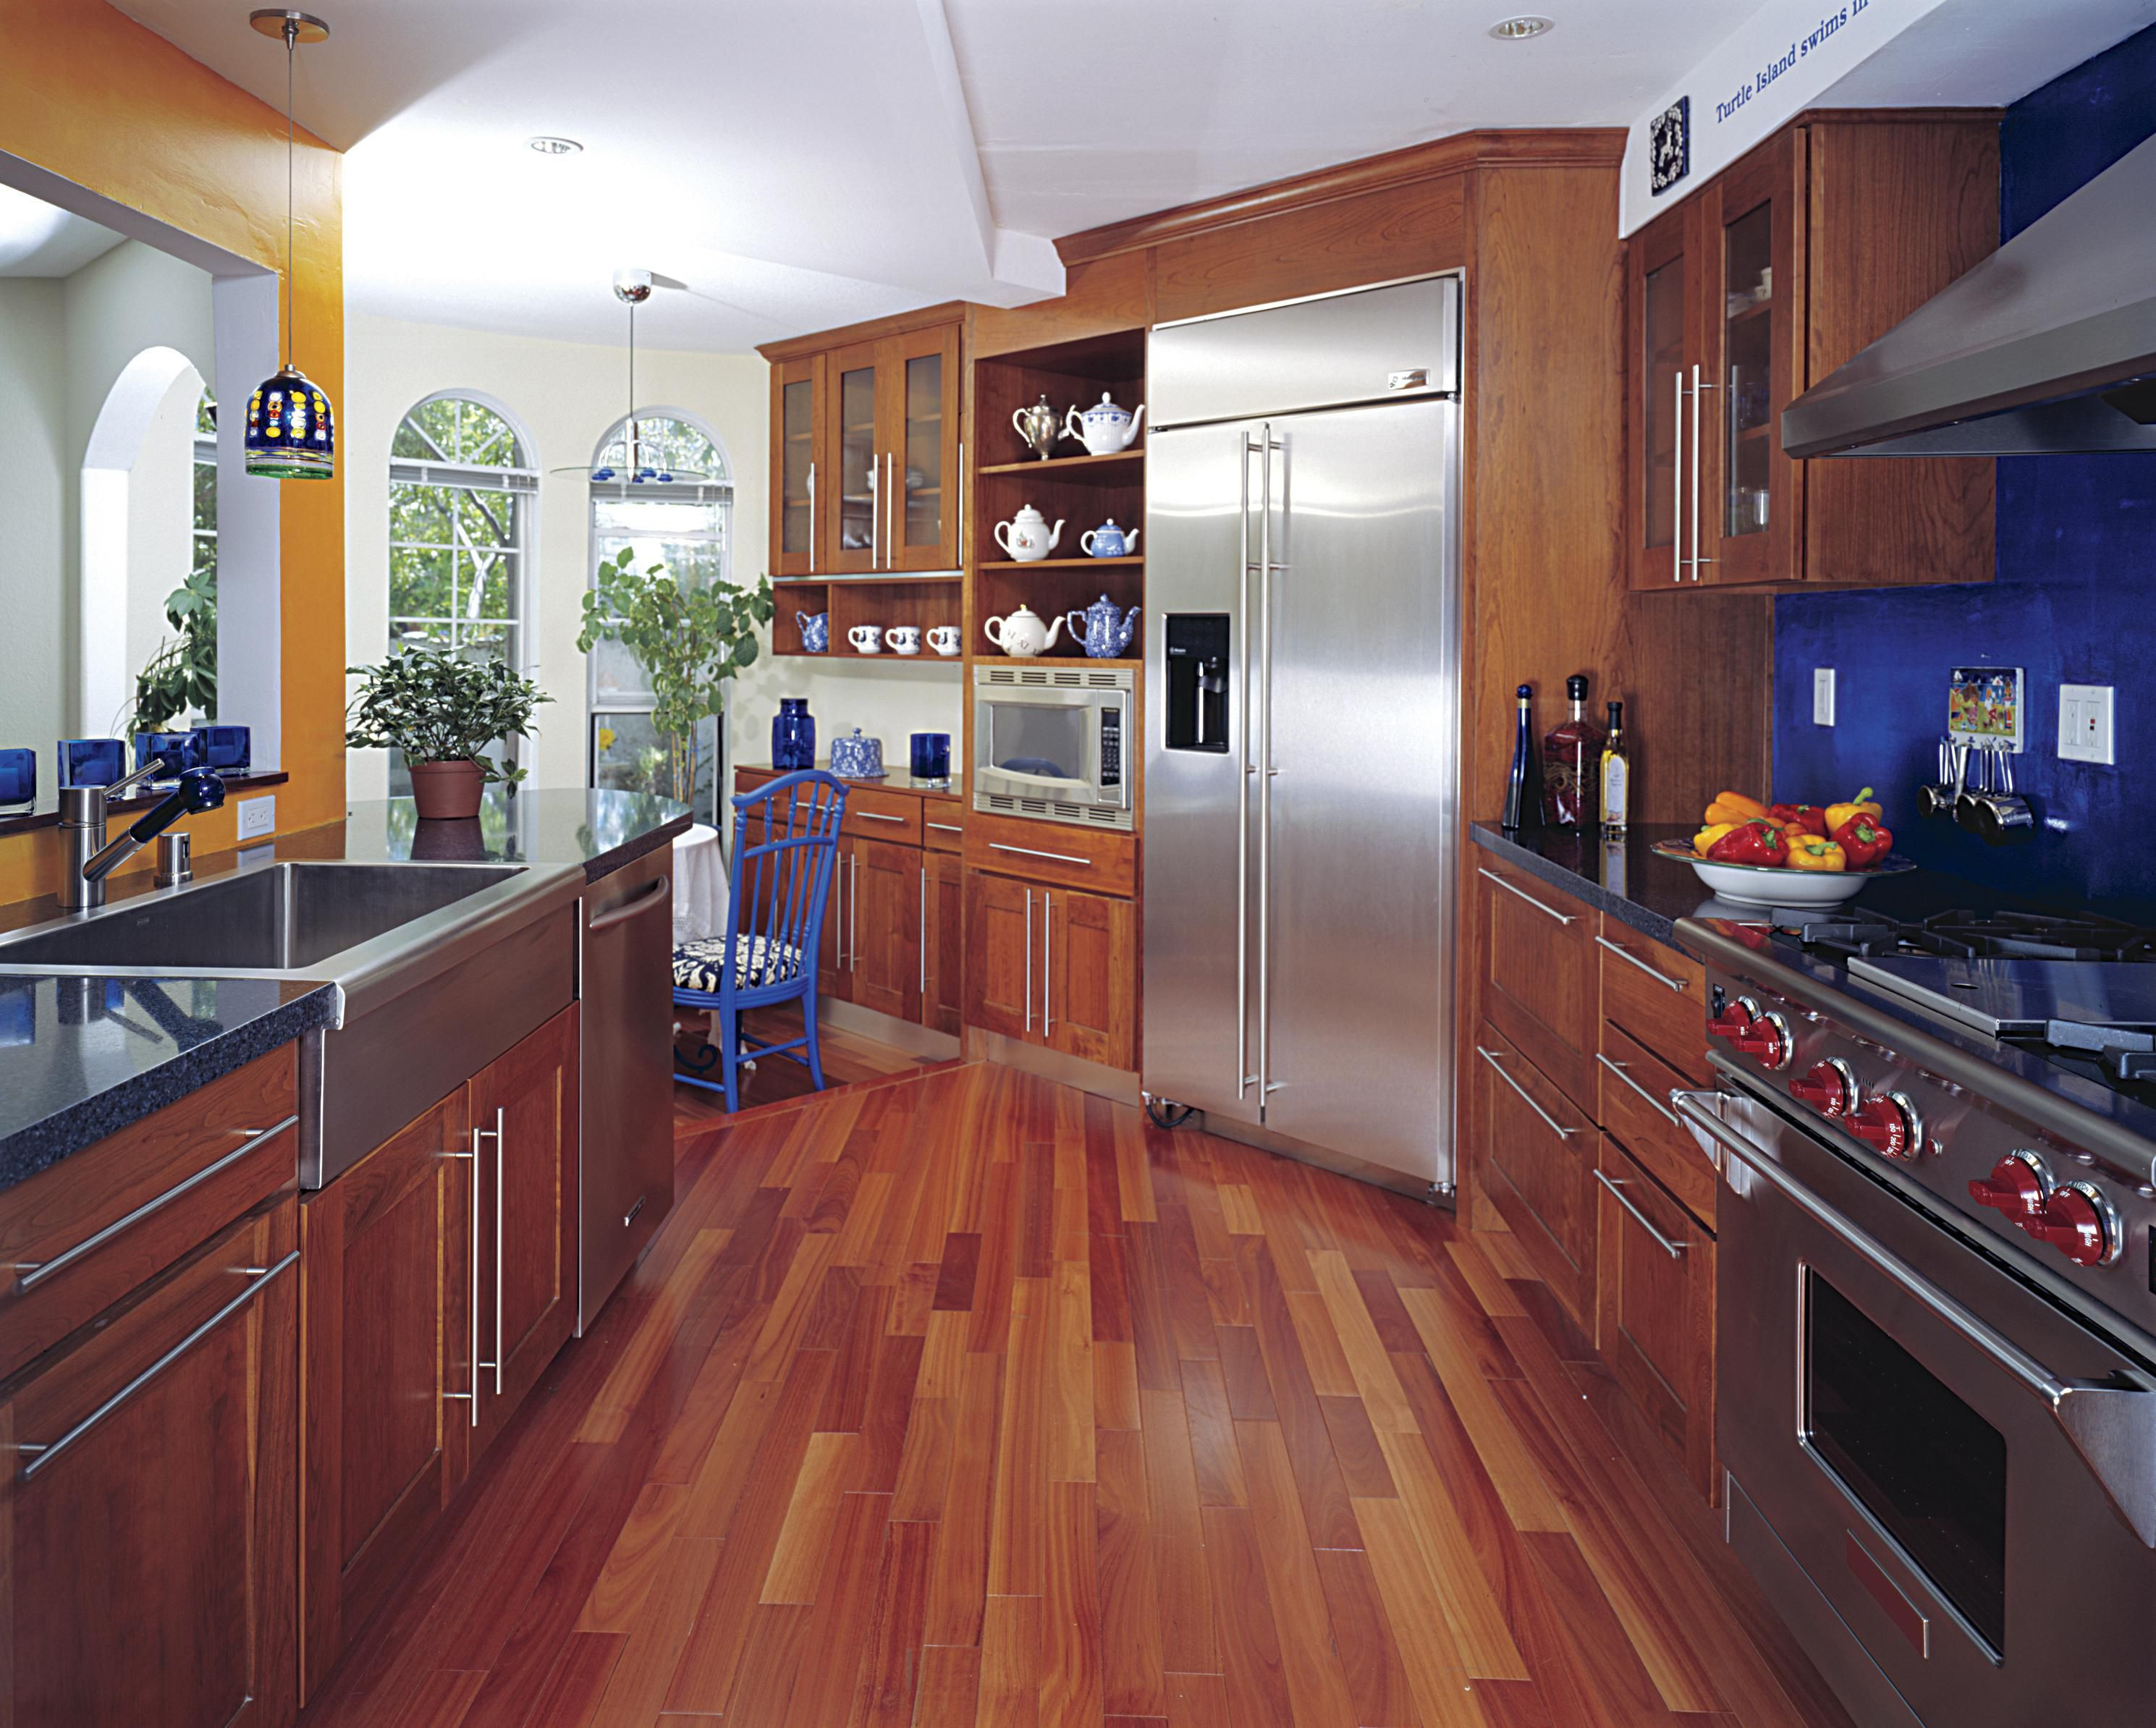 11 Perfect Oak or Maple Hardwood Floors which is Better 2024 free download oak or maple hardwood floors which is better of hardwood floor in a kitchen is this allowed intended for 186828472 56a49f3a5f9b58b7d0d7e142